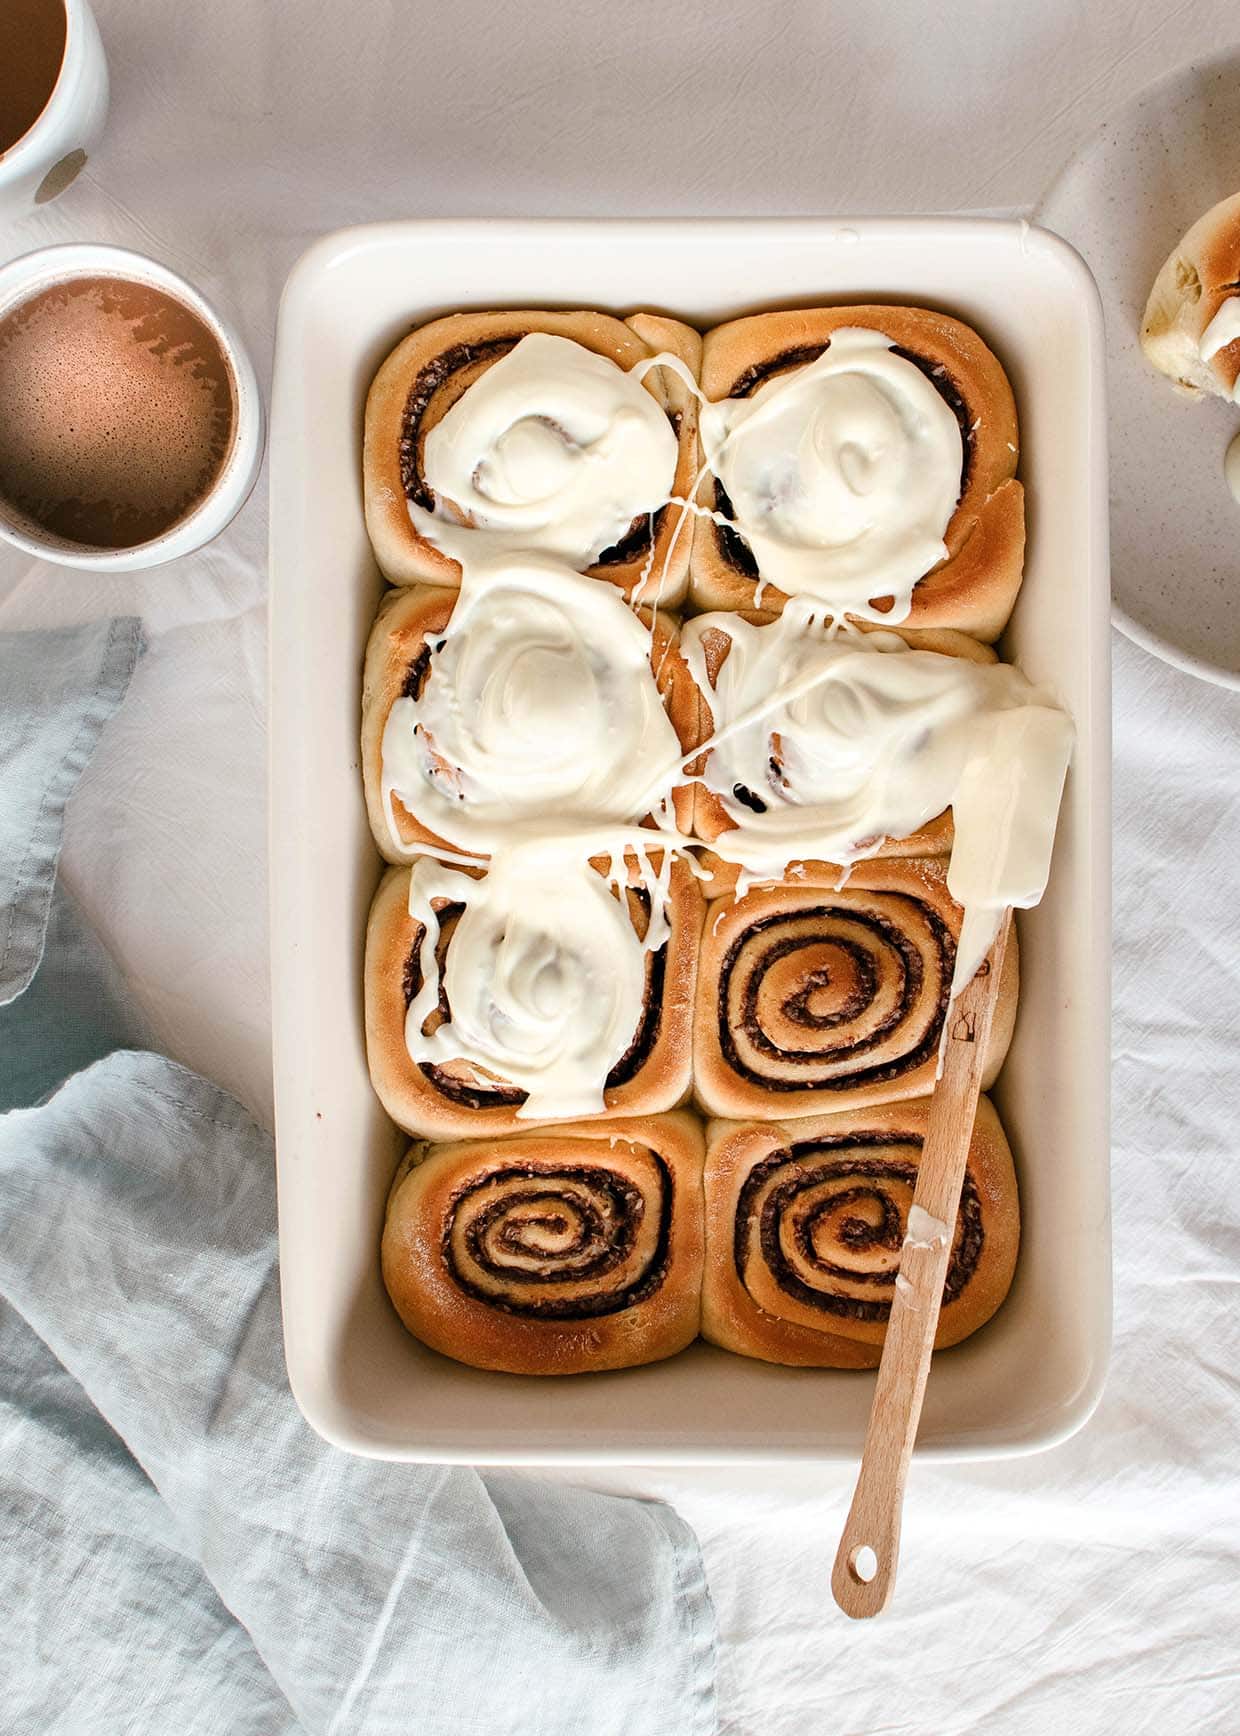 cinnamon rolls in baking pan with white chocolate glaze on top